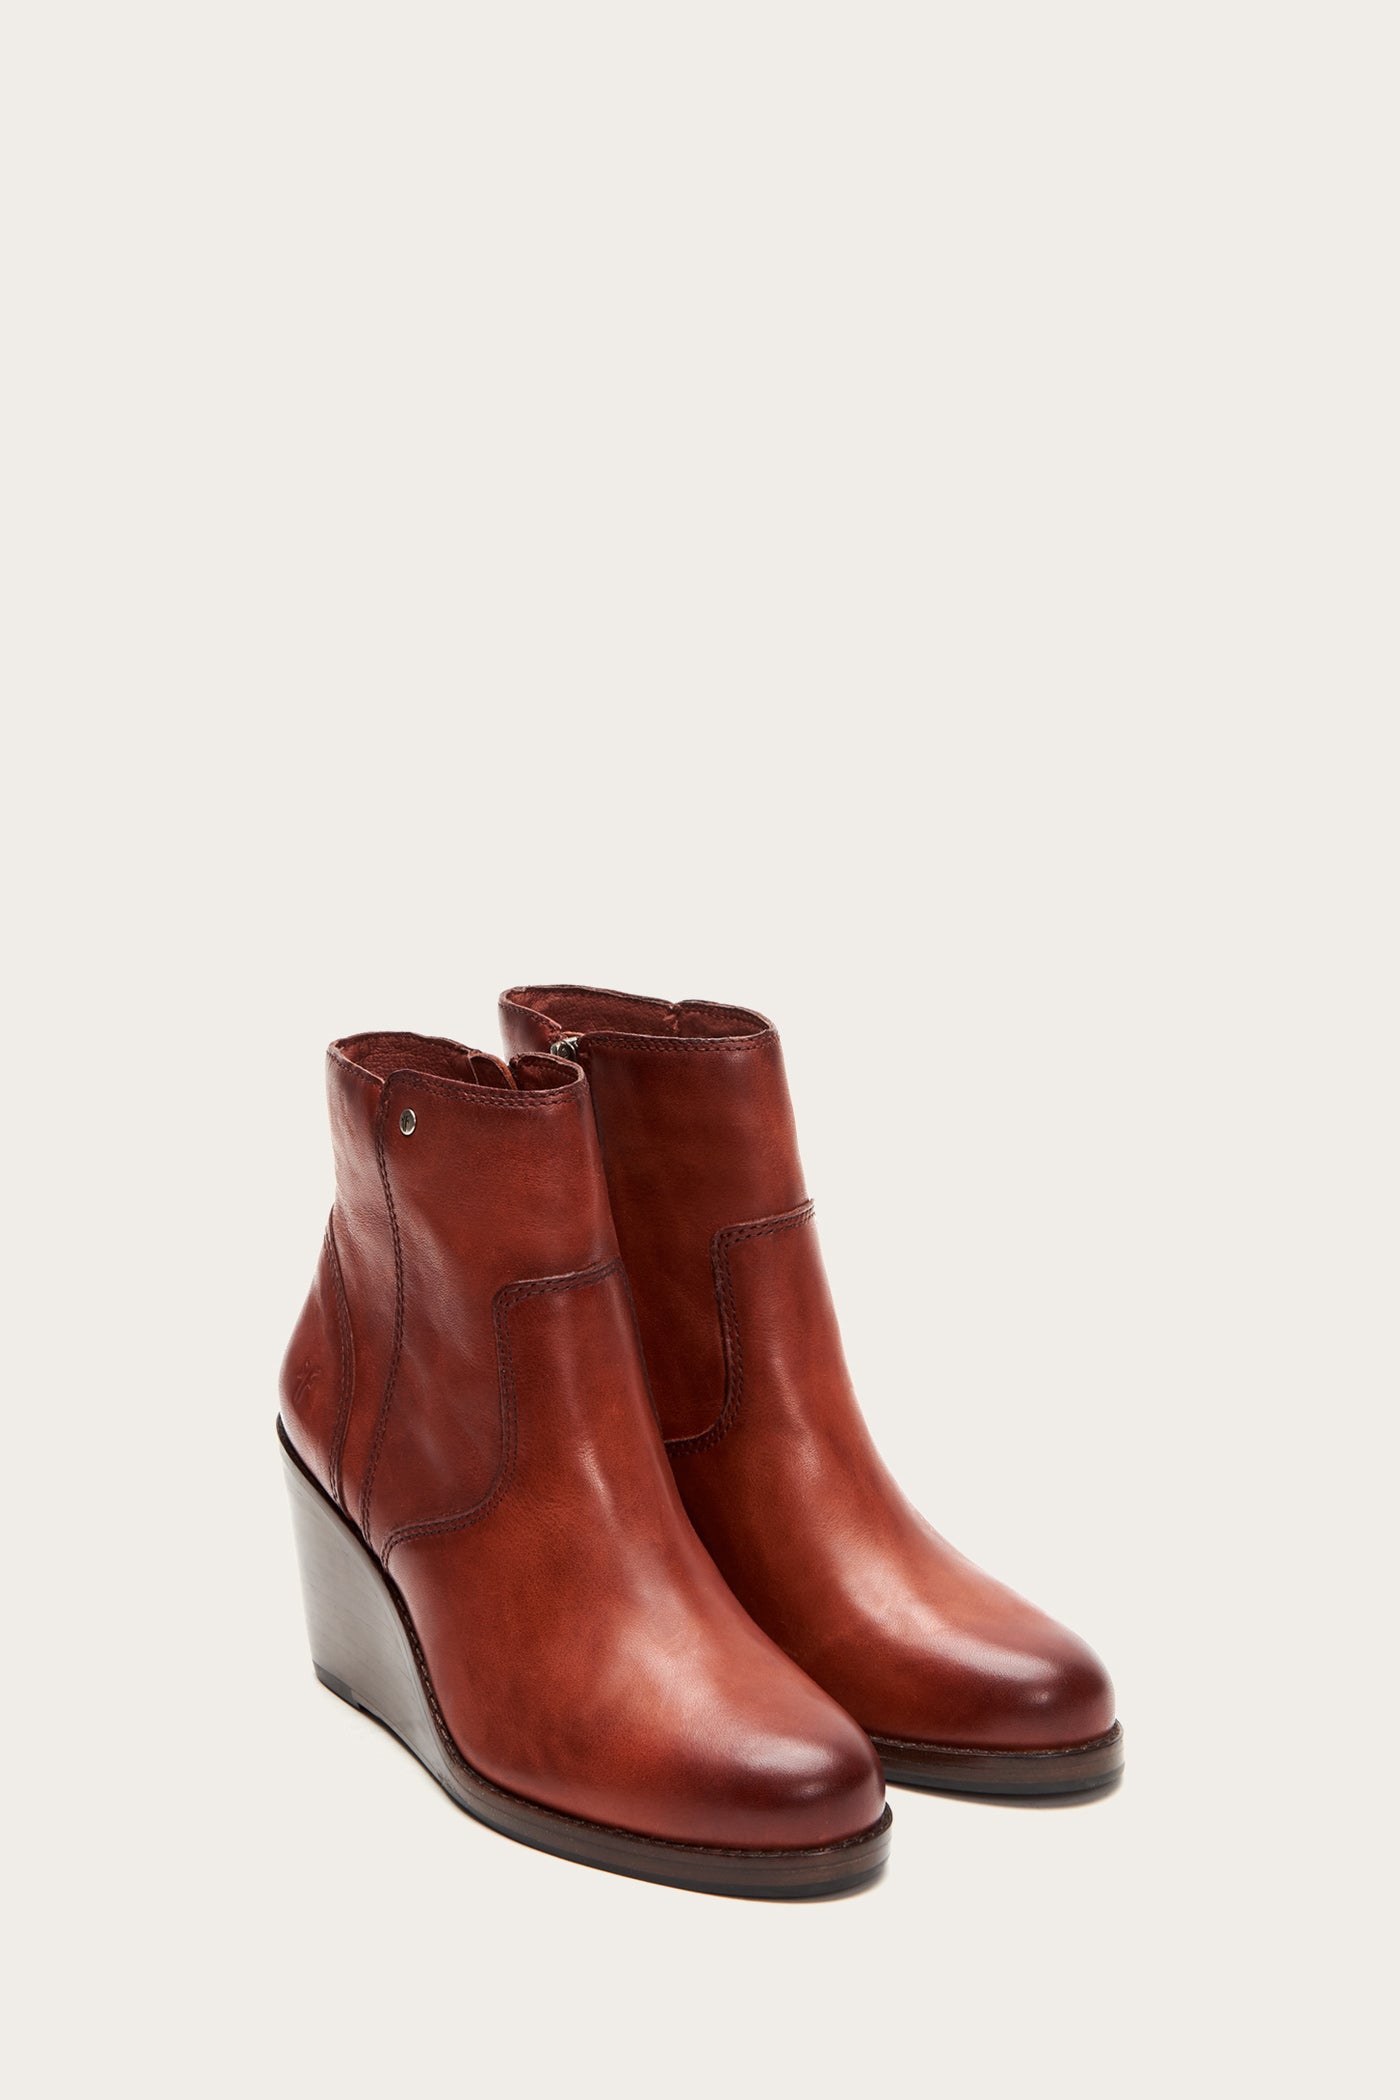 frye wedge tall boots